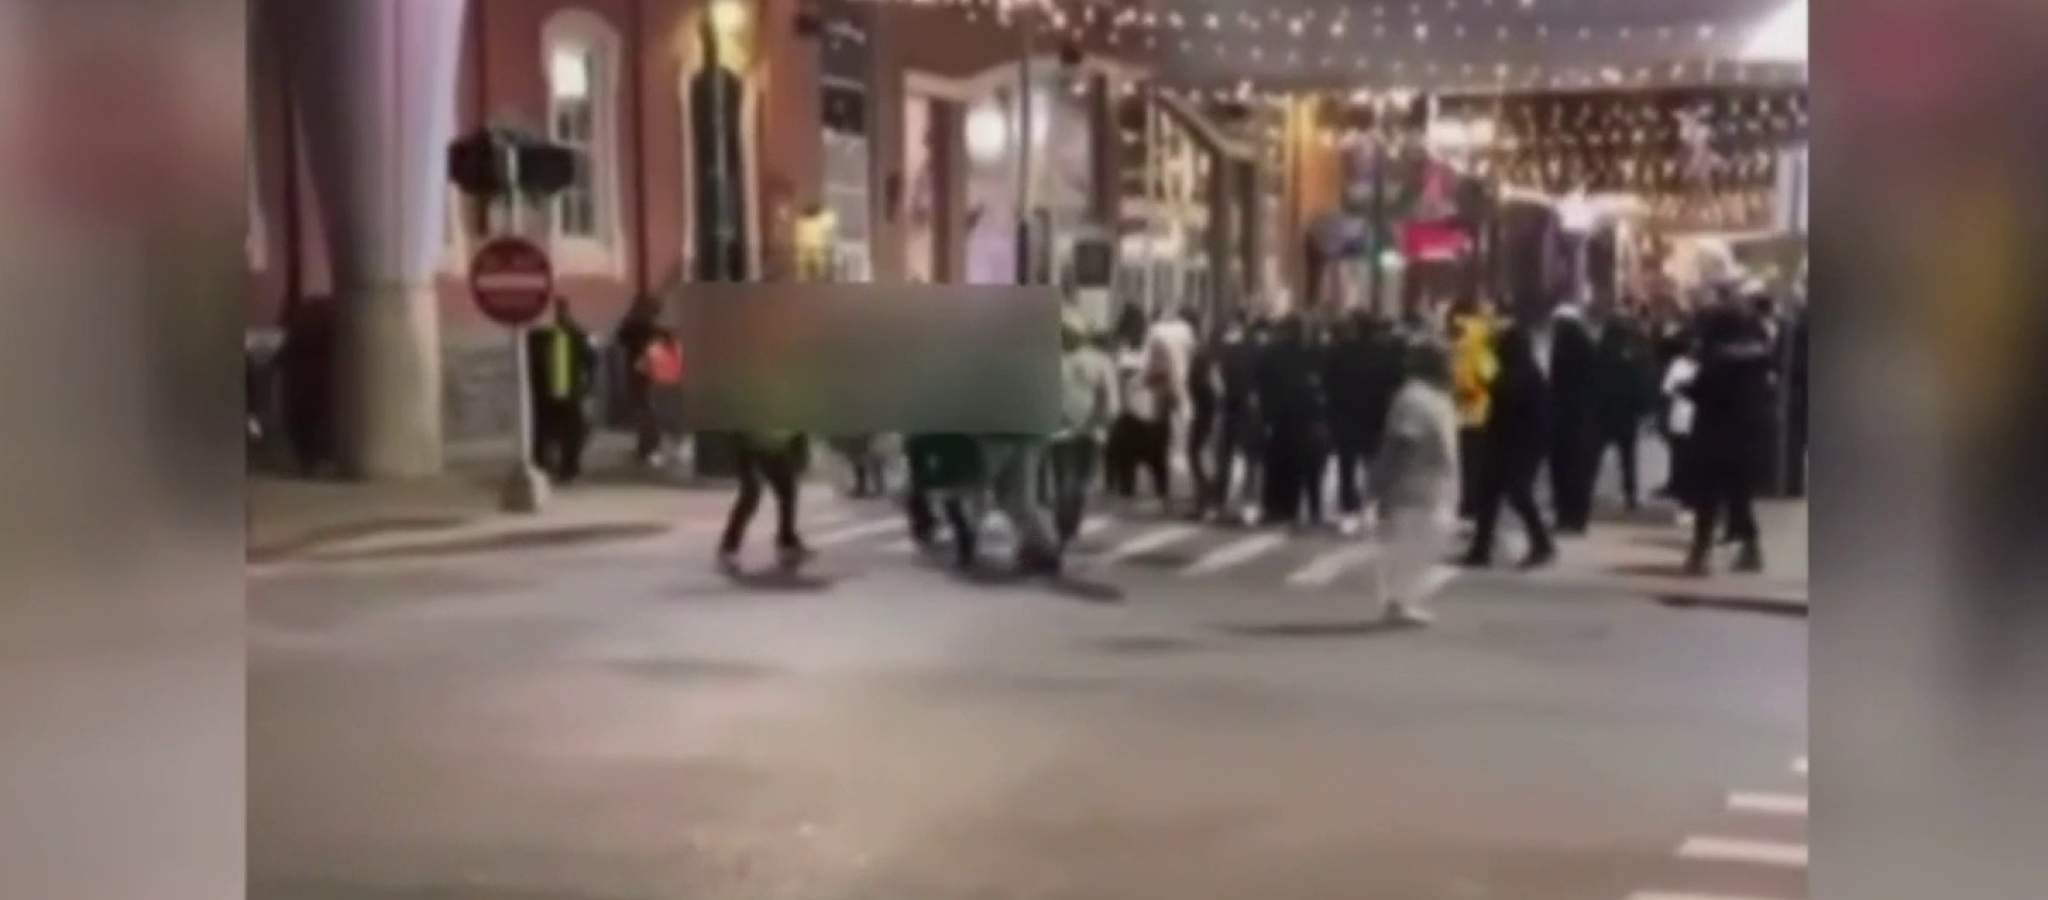 2 people stabbed in large St. Patrick’s Day crowd in Greektown